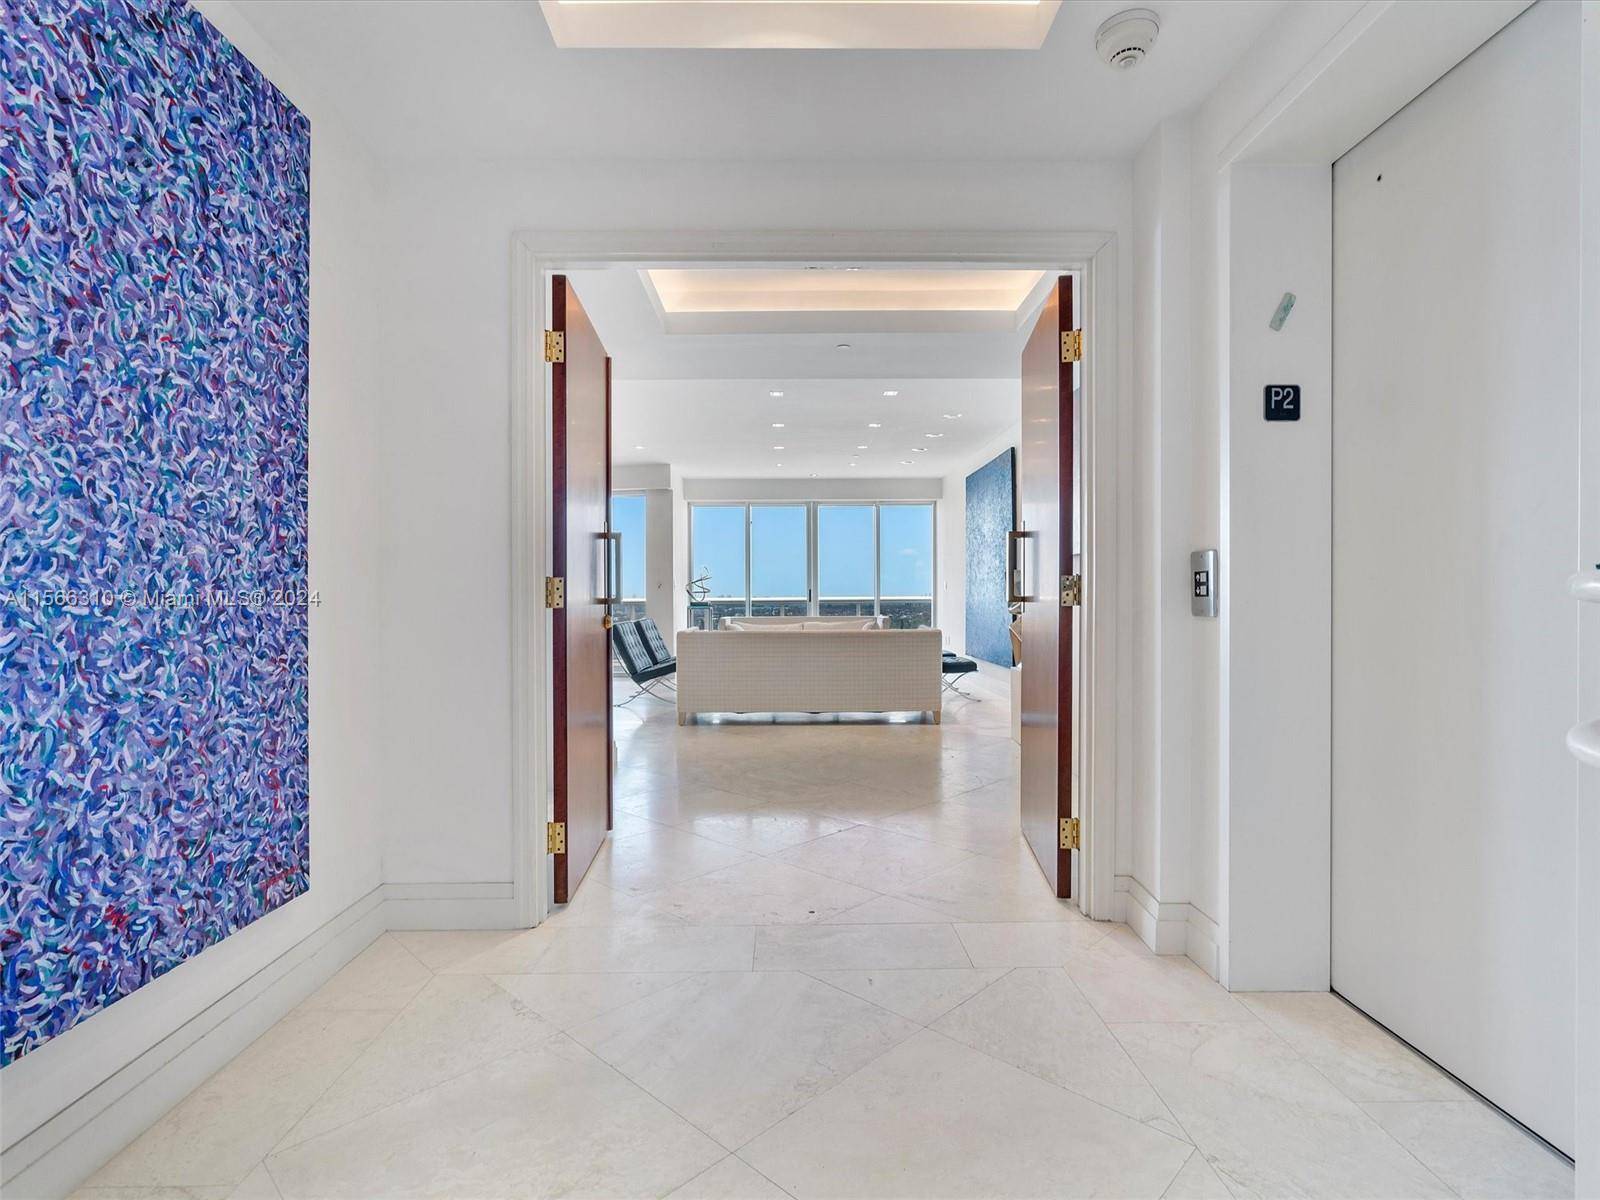 Experience unparalleled luxury at Bal Harbour's Majestic Tower PH206.